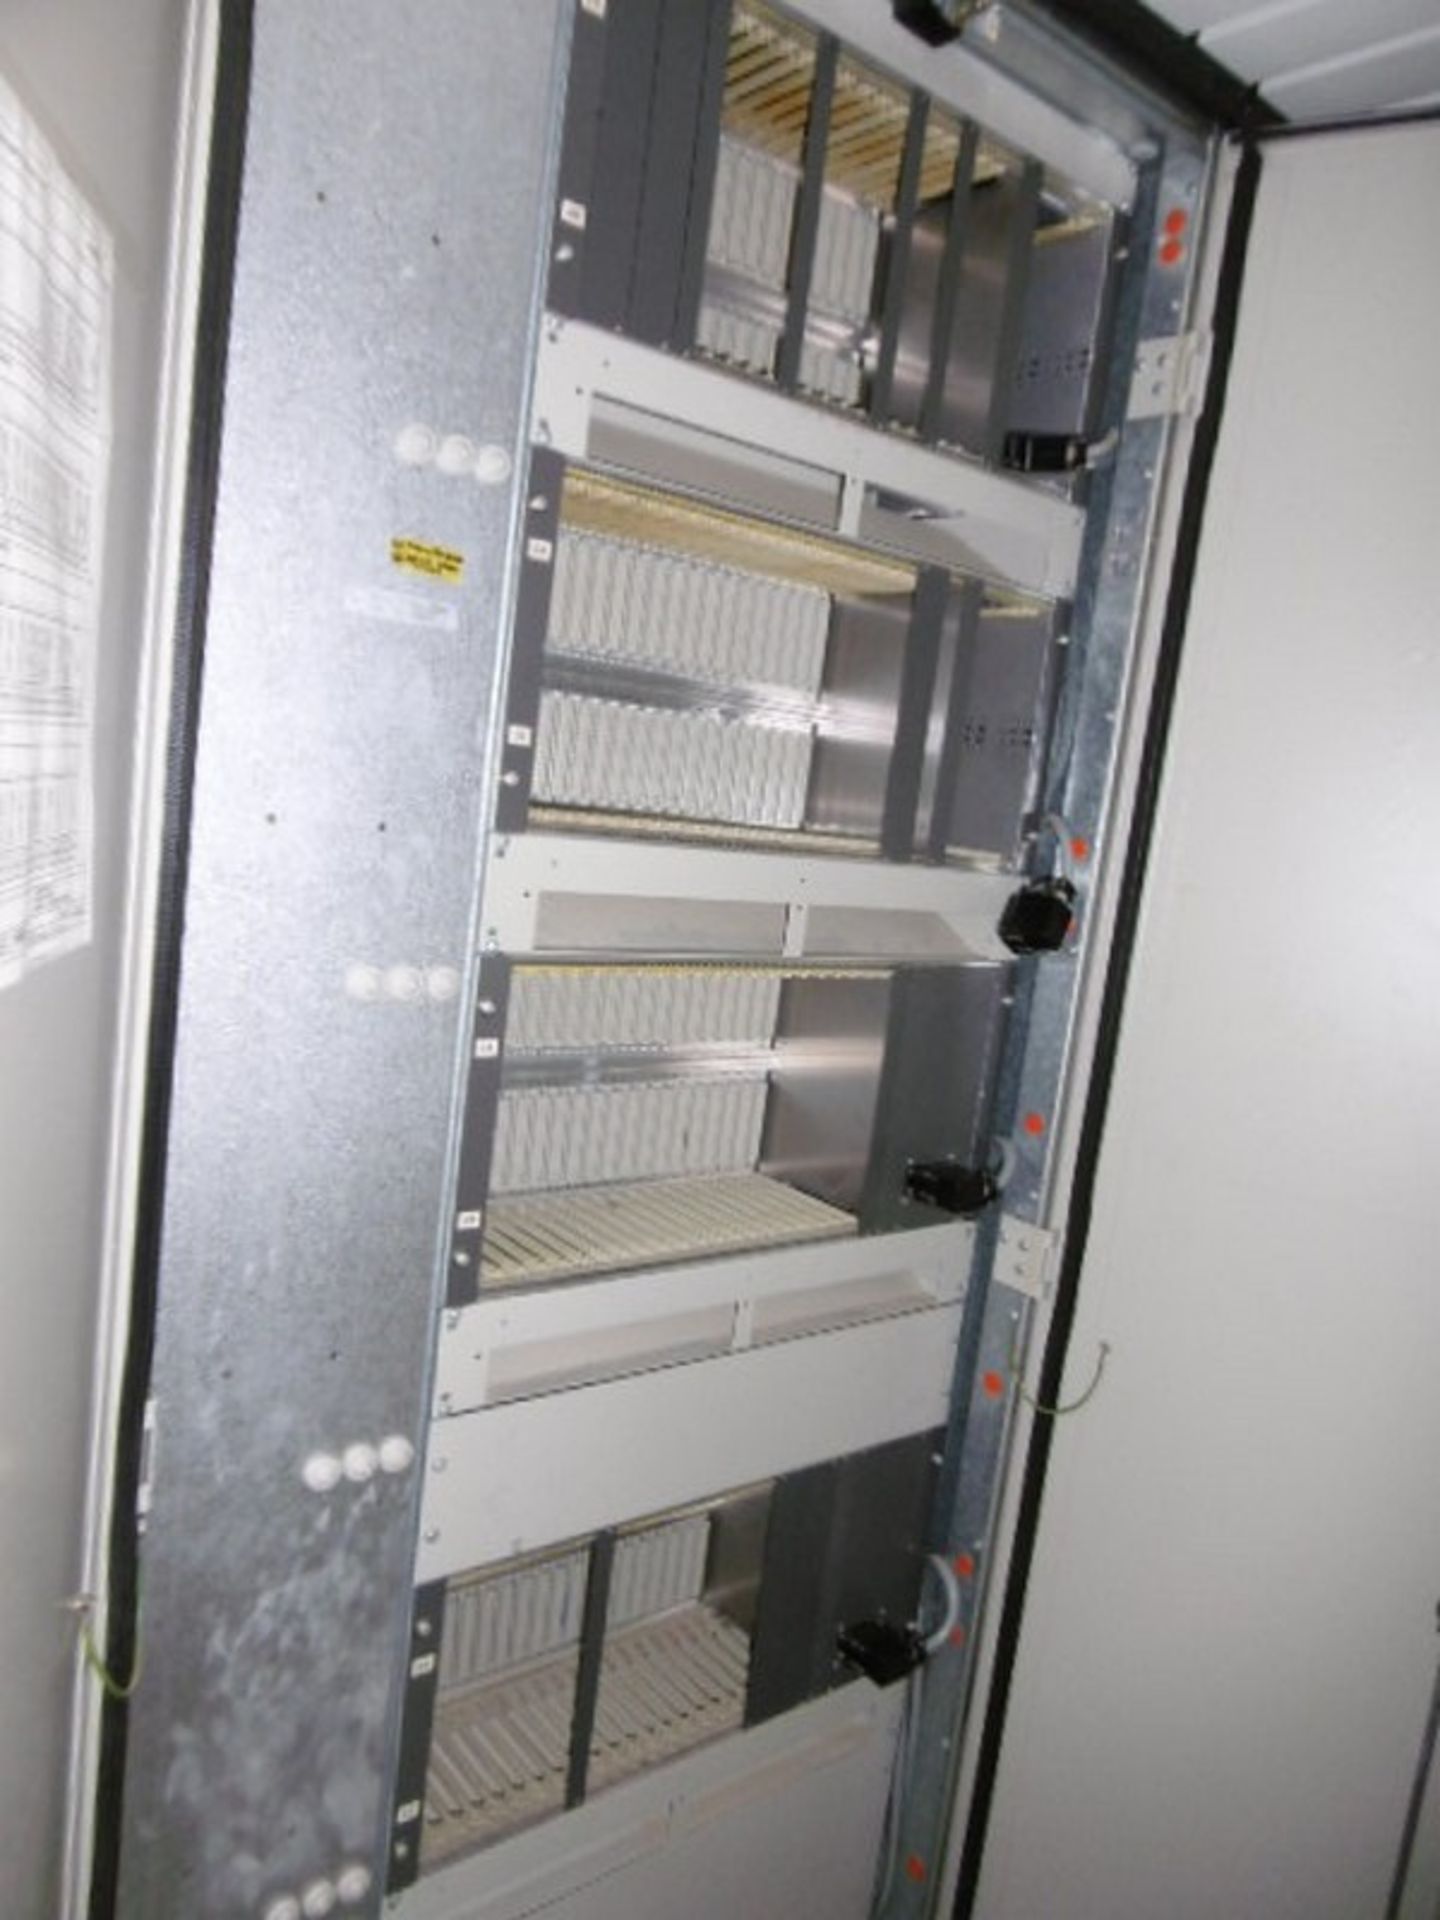 Large Qty Switchgear - From Gas Turbine 1 Control Module Building - Image 9 of 33